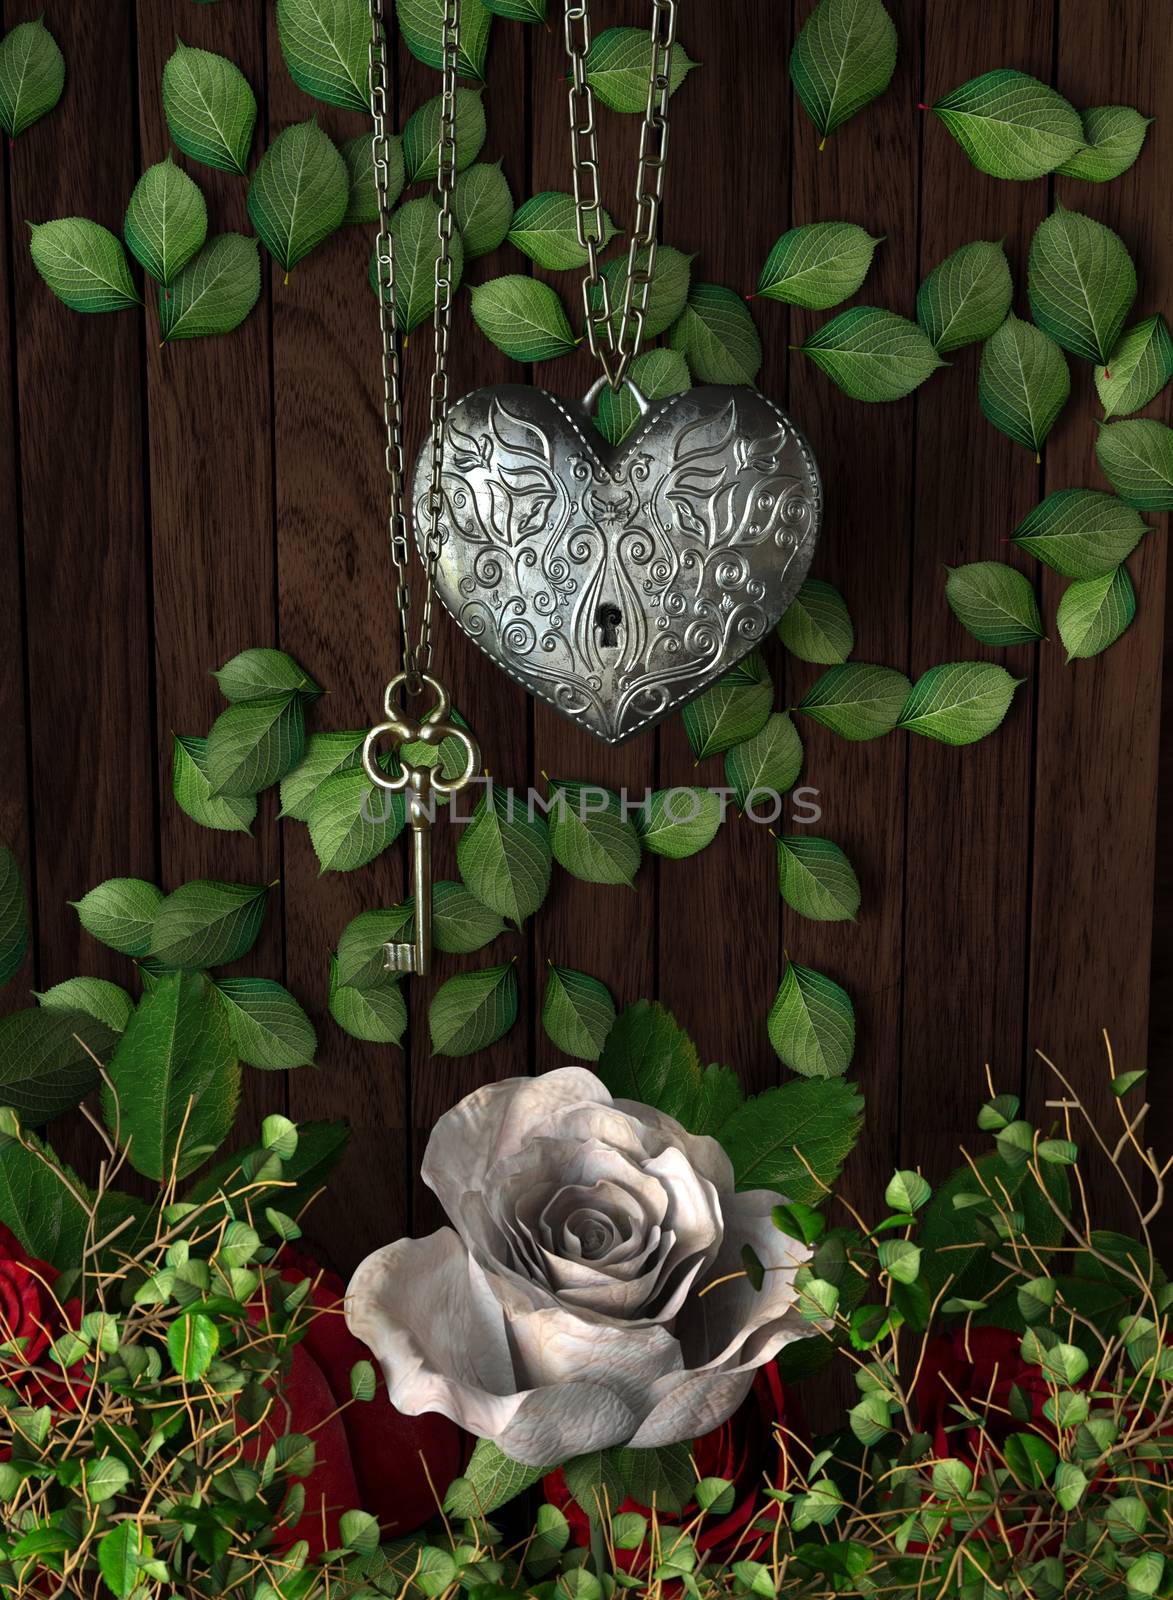 Roses and a heart with key on wooden board, conceptual holiday background